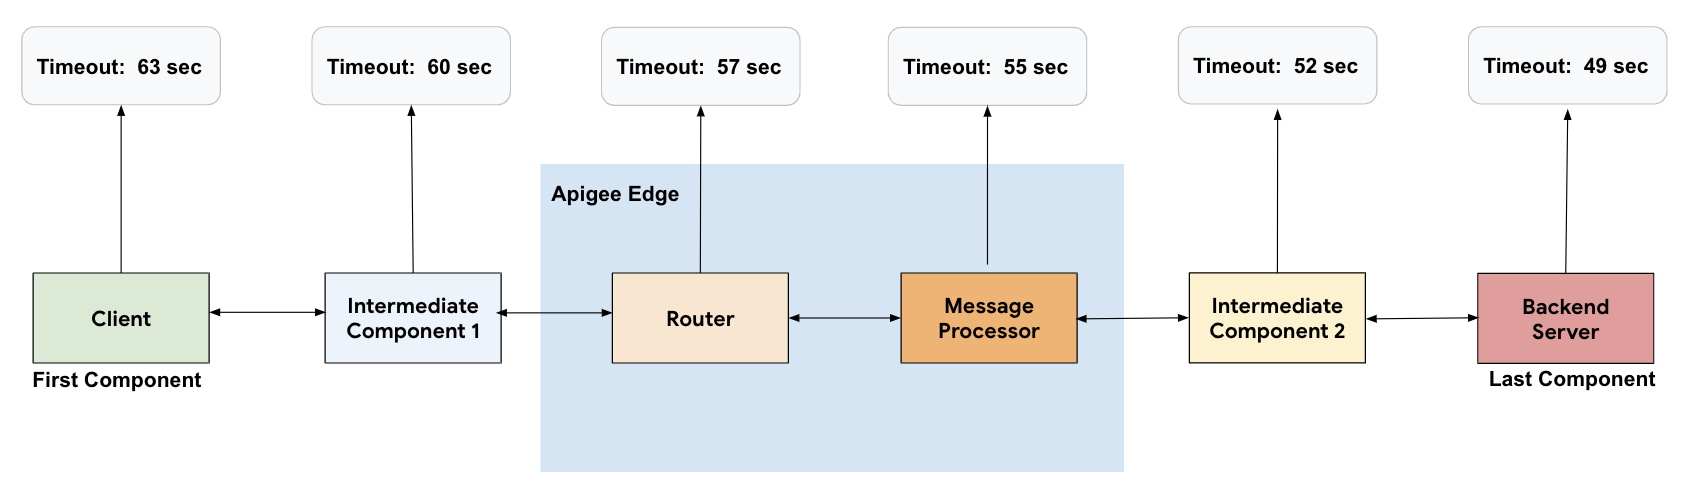 Flow starting at Client going to Intermediate Component 1 and then to Router and then to Message Processor and then to Intermediate Component 2 and then to Backend Server